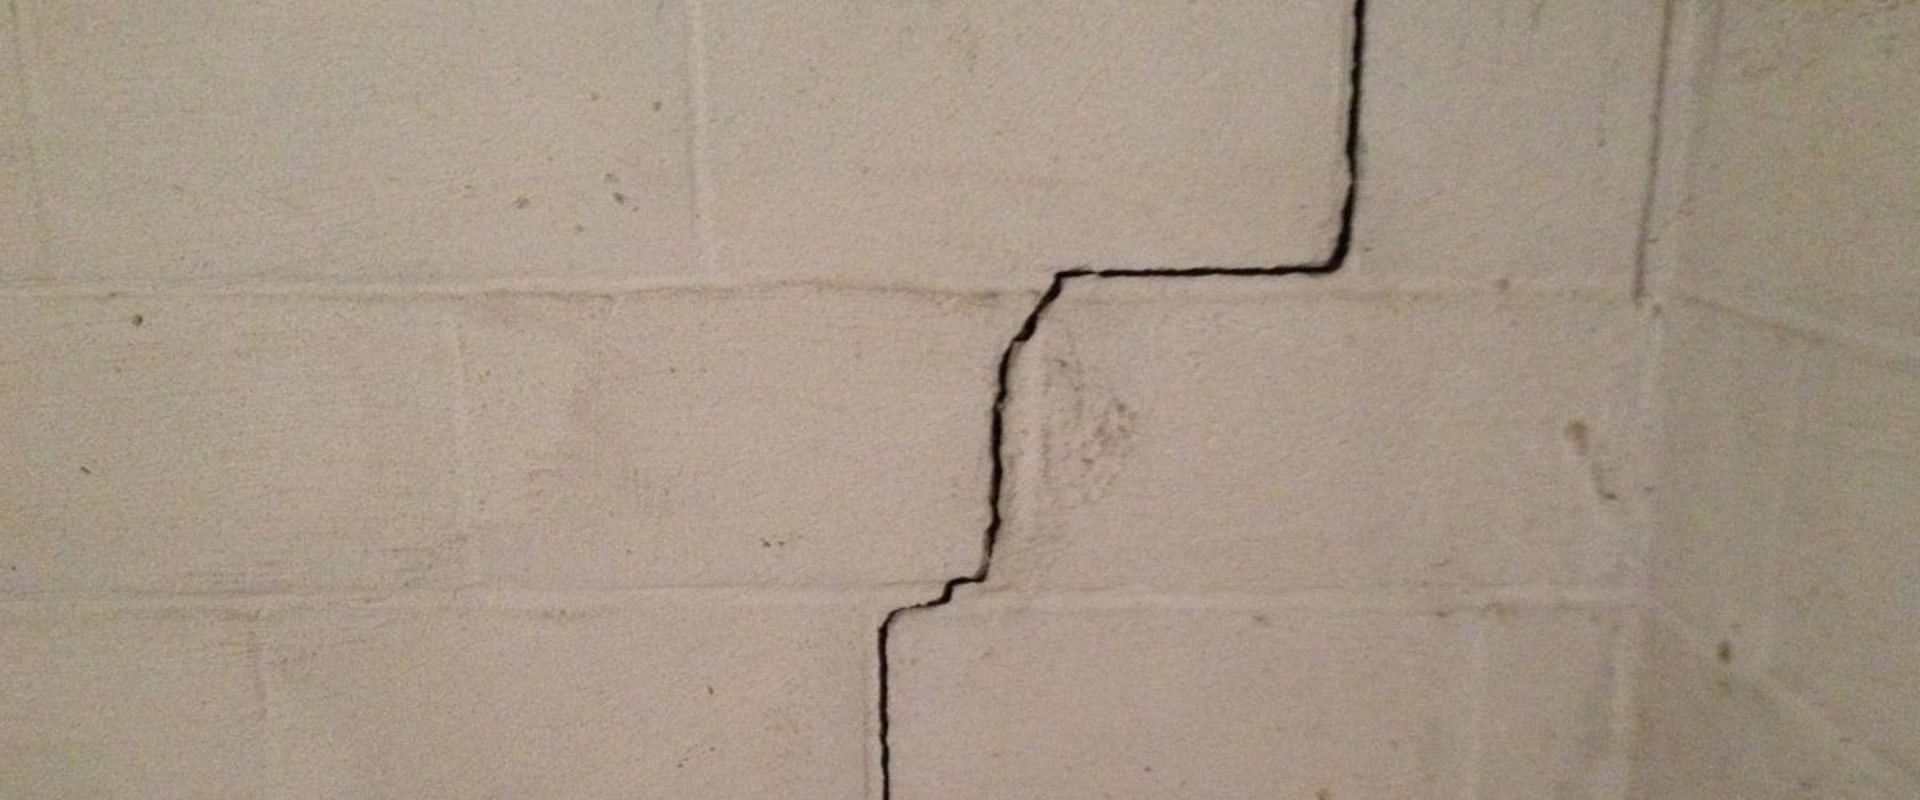 How much does it cost to repair foundation cracks?